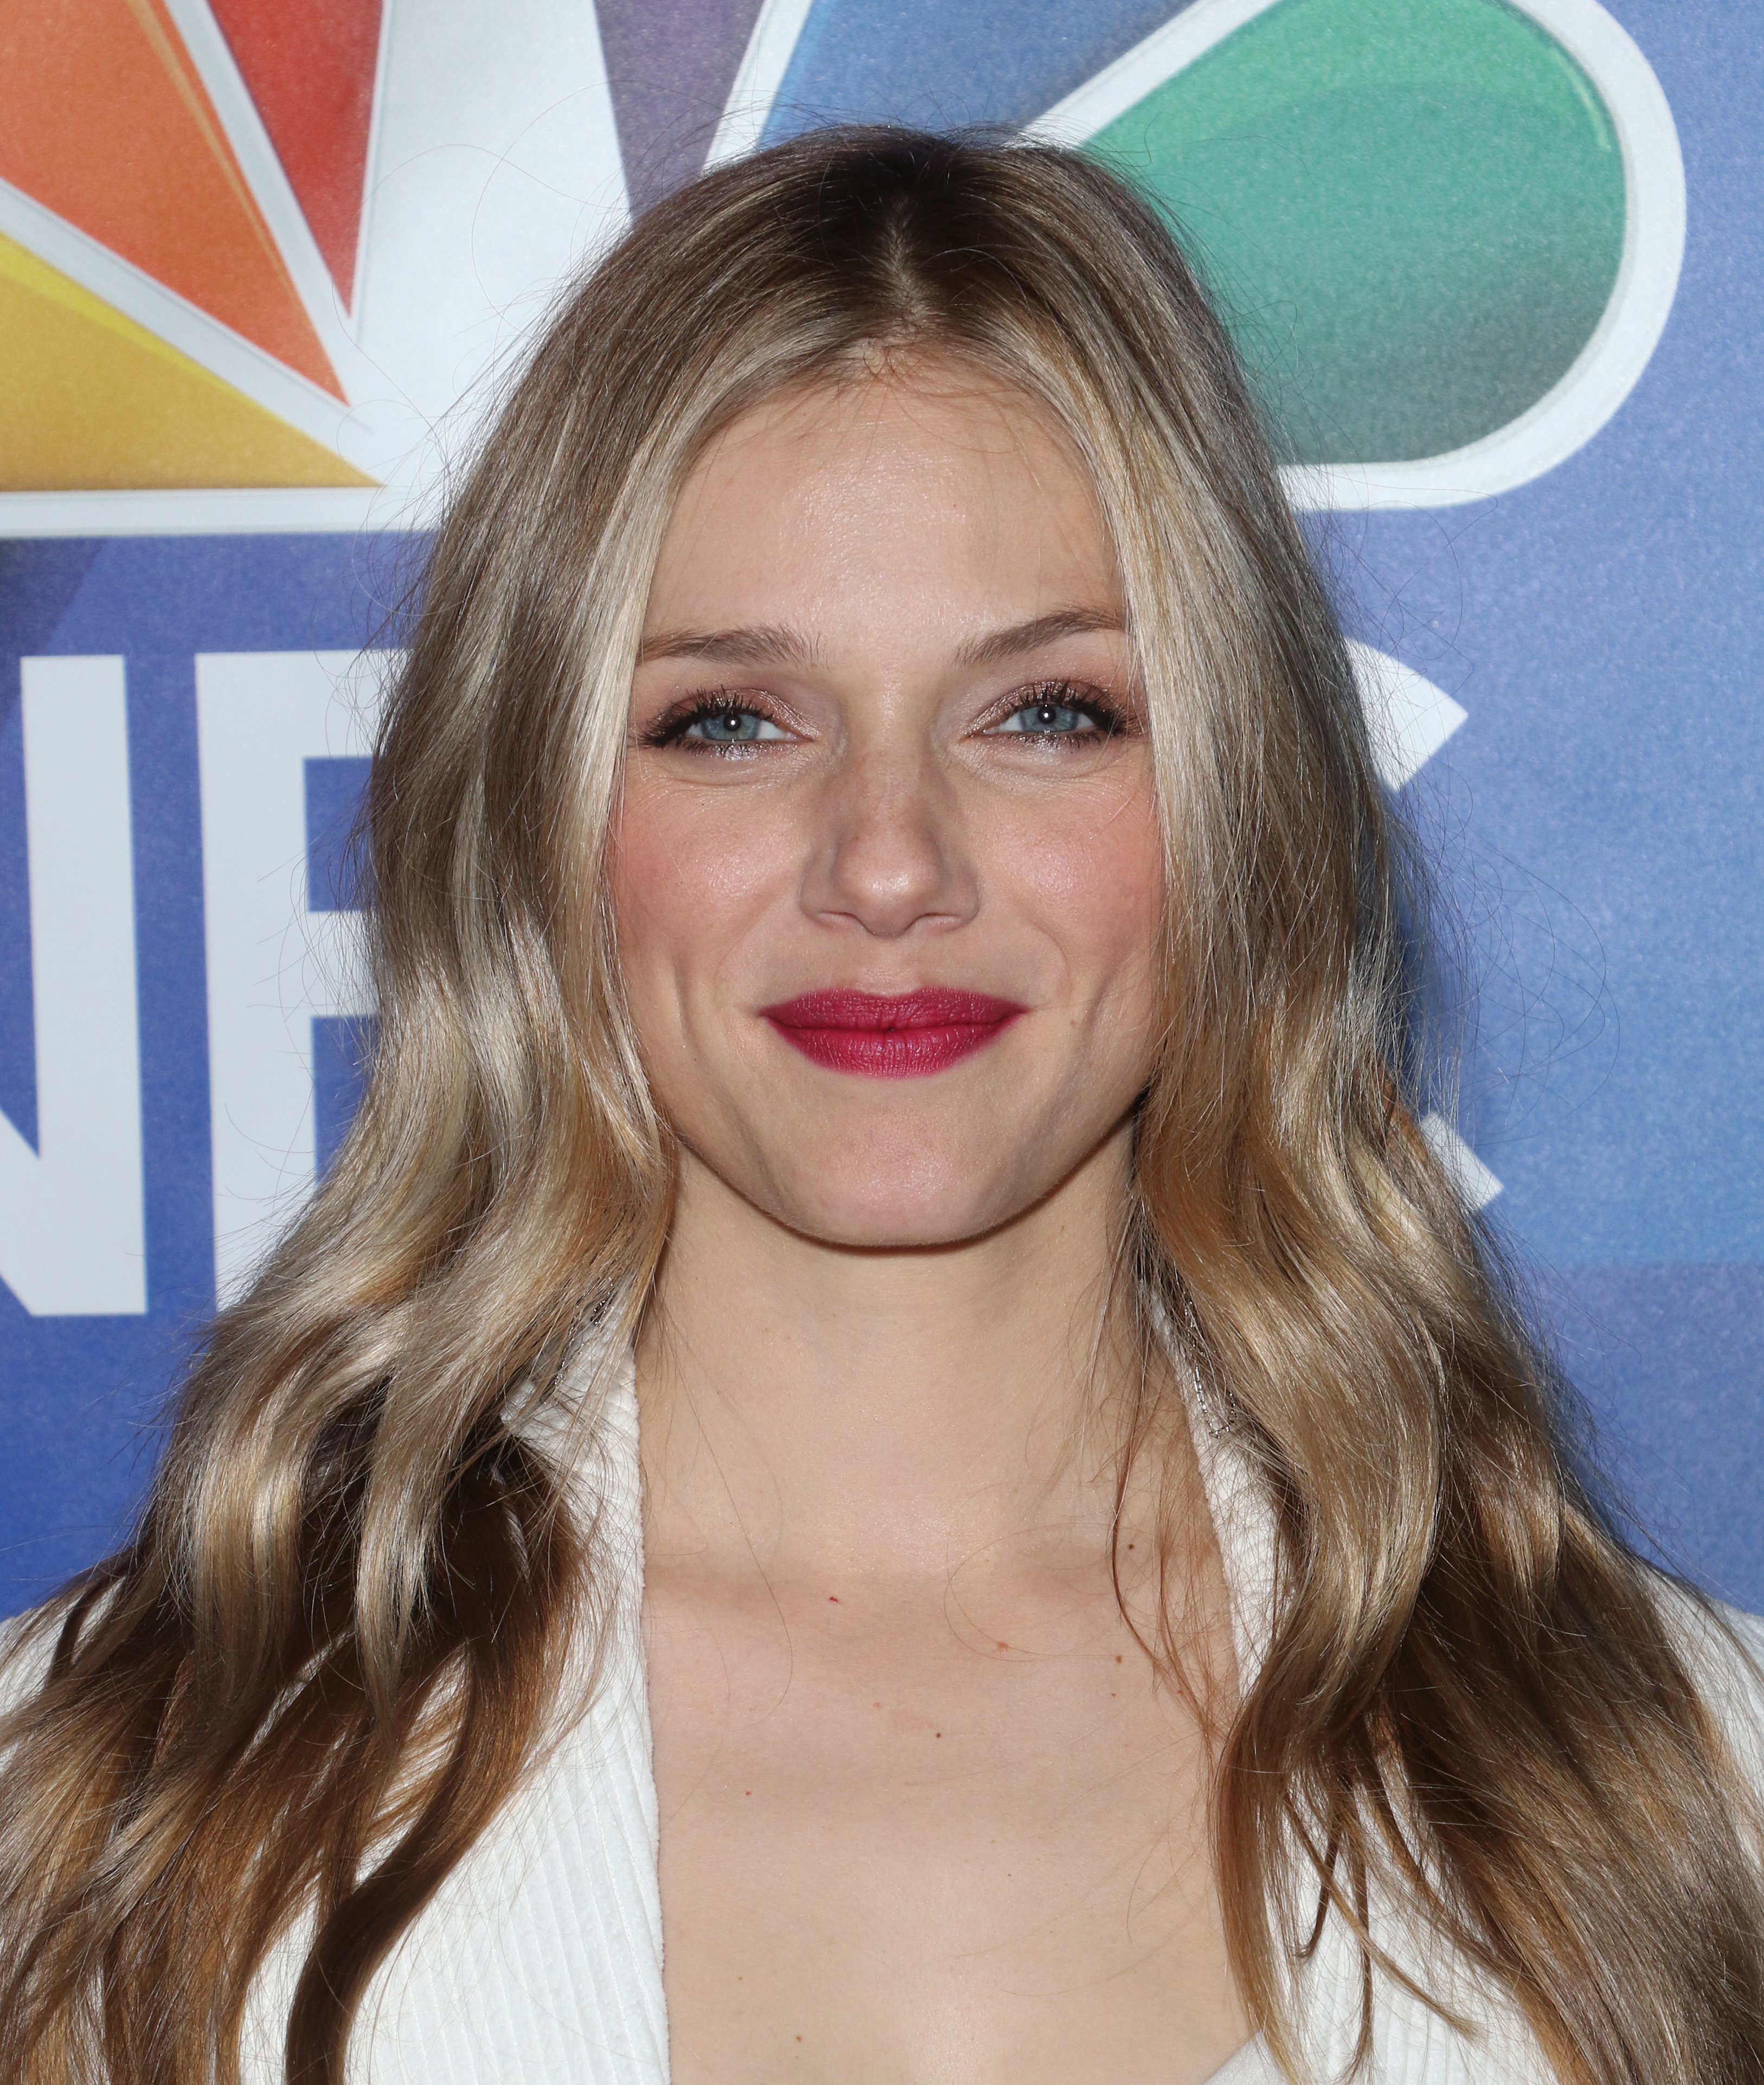 Tracy Spiridakos poses at the NBC 2019/20 Upfront at Four Seasons Hotel New York on May 13, 2019, in New York City | Source: Getty Images